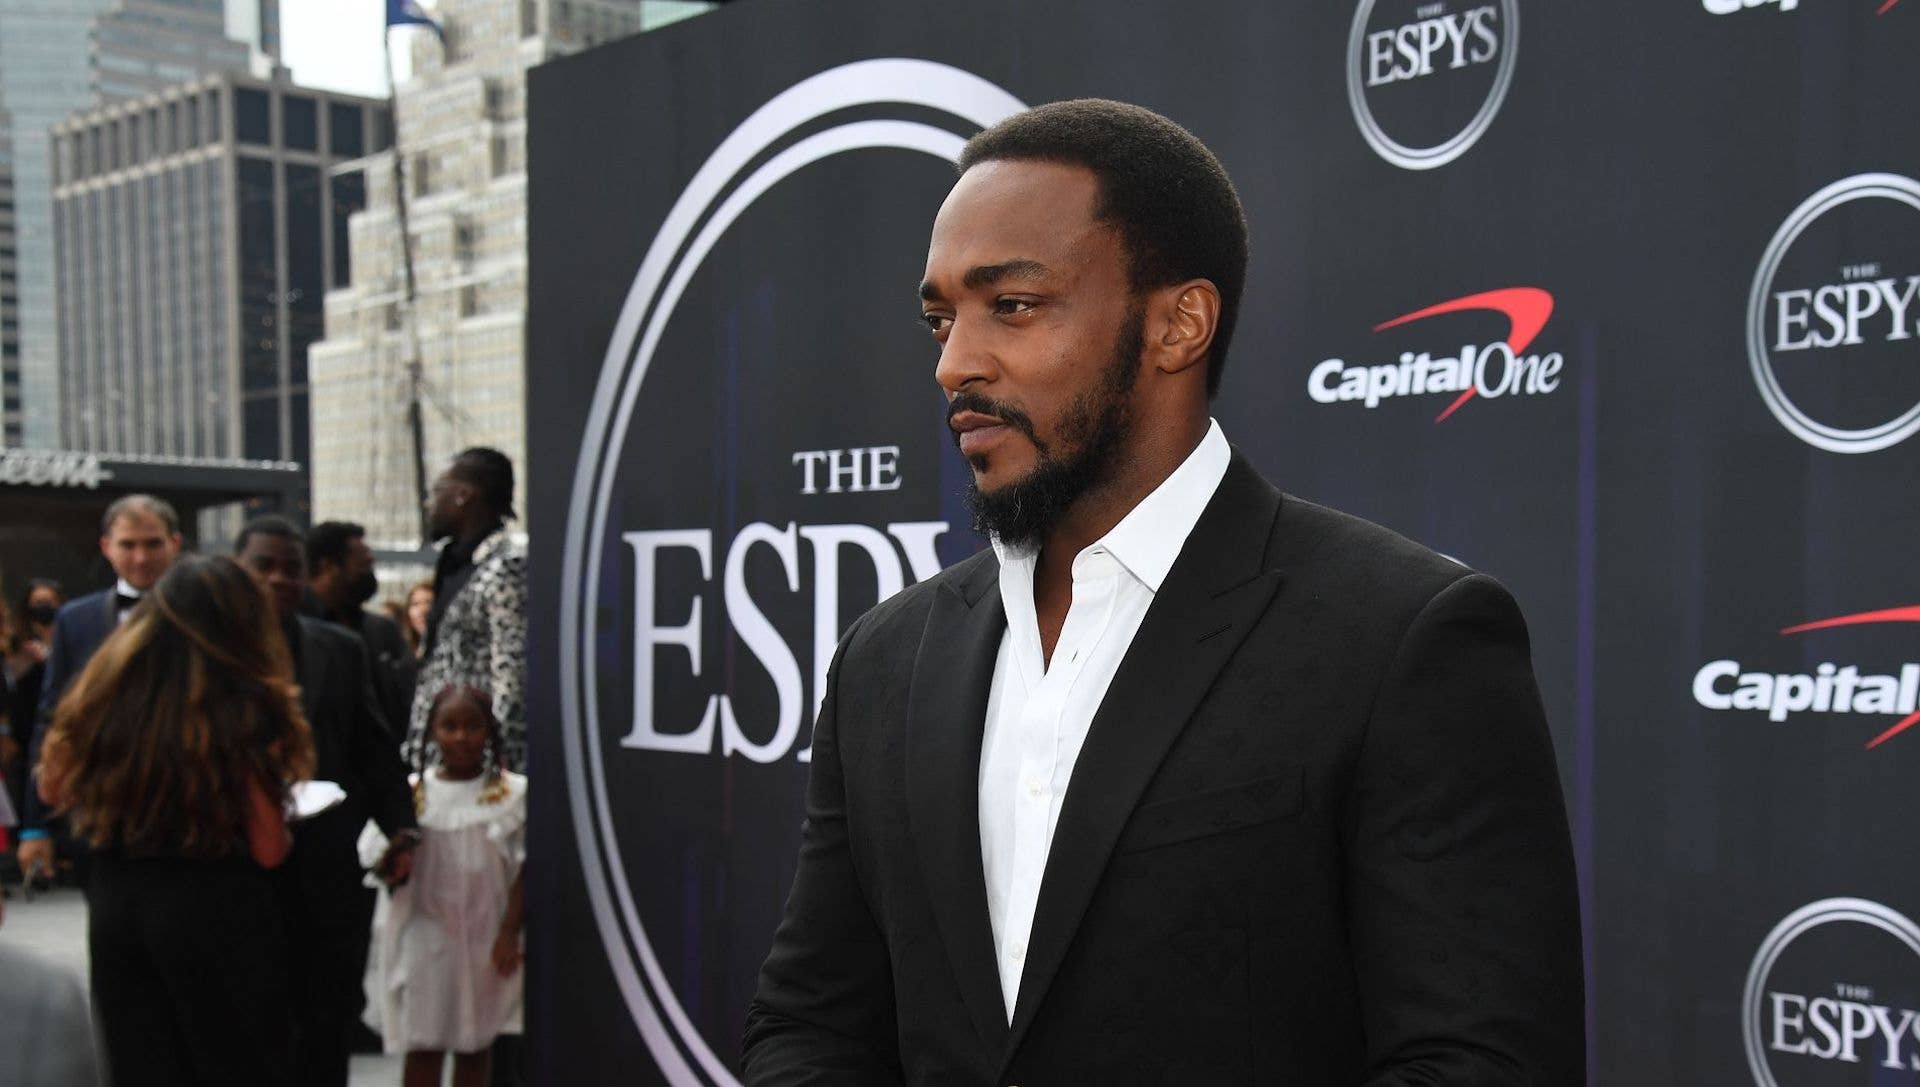 Anthony Mackie is set to star as John Doe in the TWISTED METAL